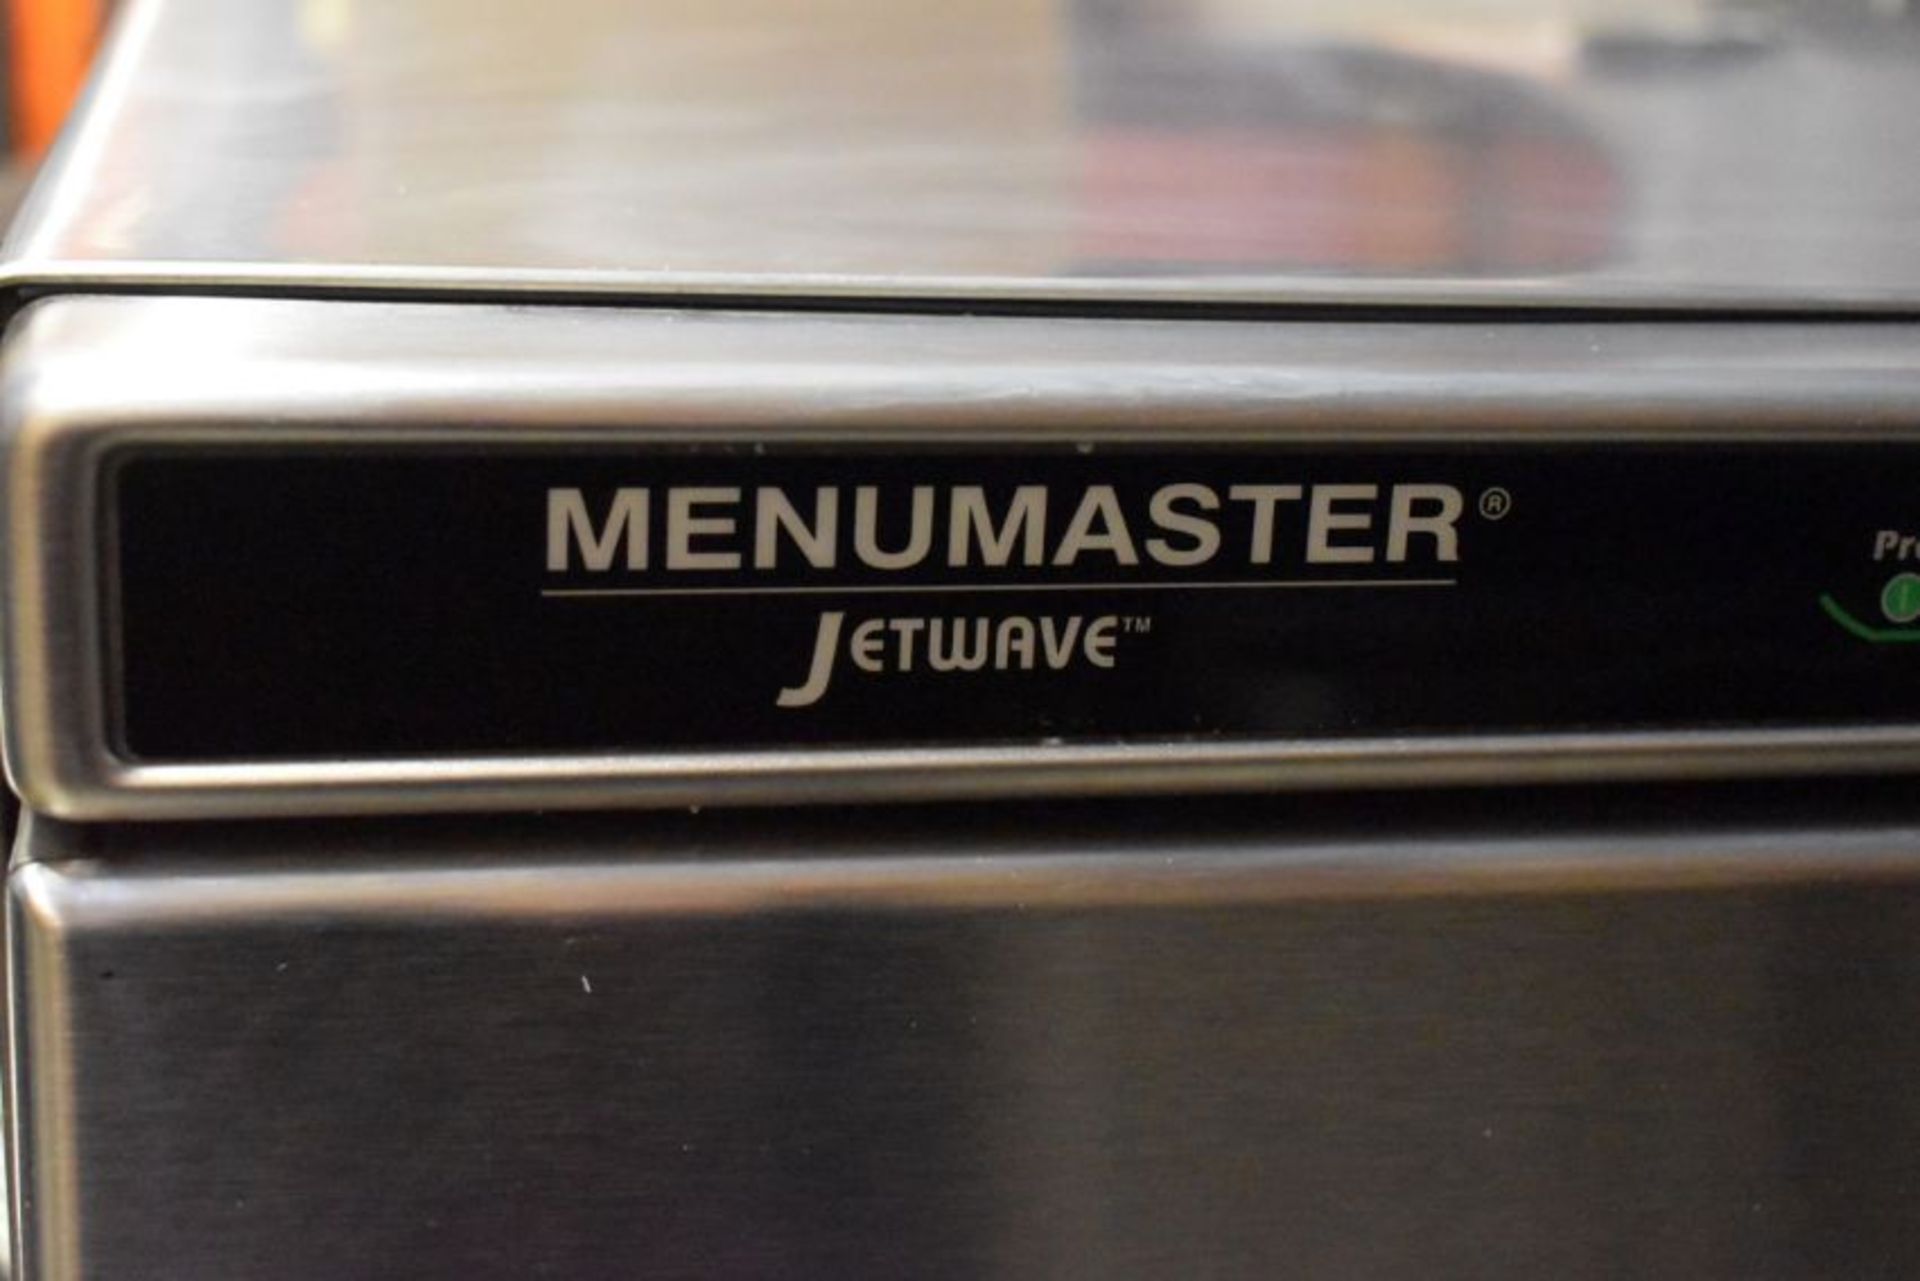 1 x Menumaster Jetwave JET514U High Speed Combination Microwave Oven - RRP £2,400 - CL232 - Ref: IN2 - Image 6 of 9